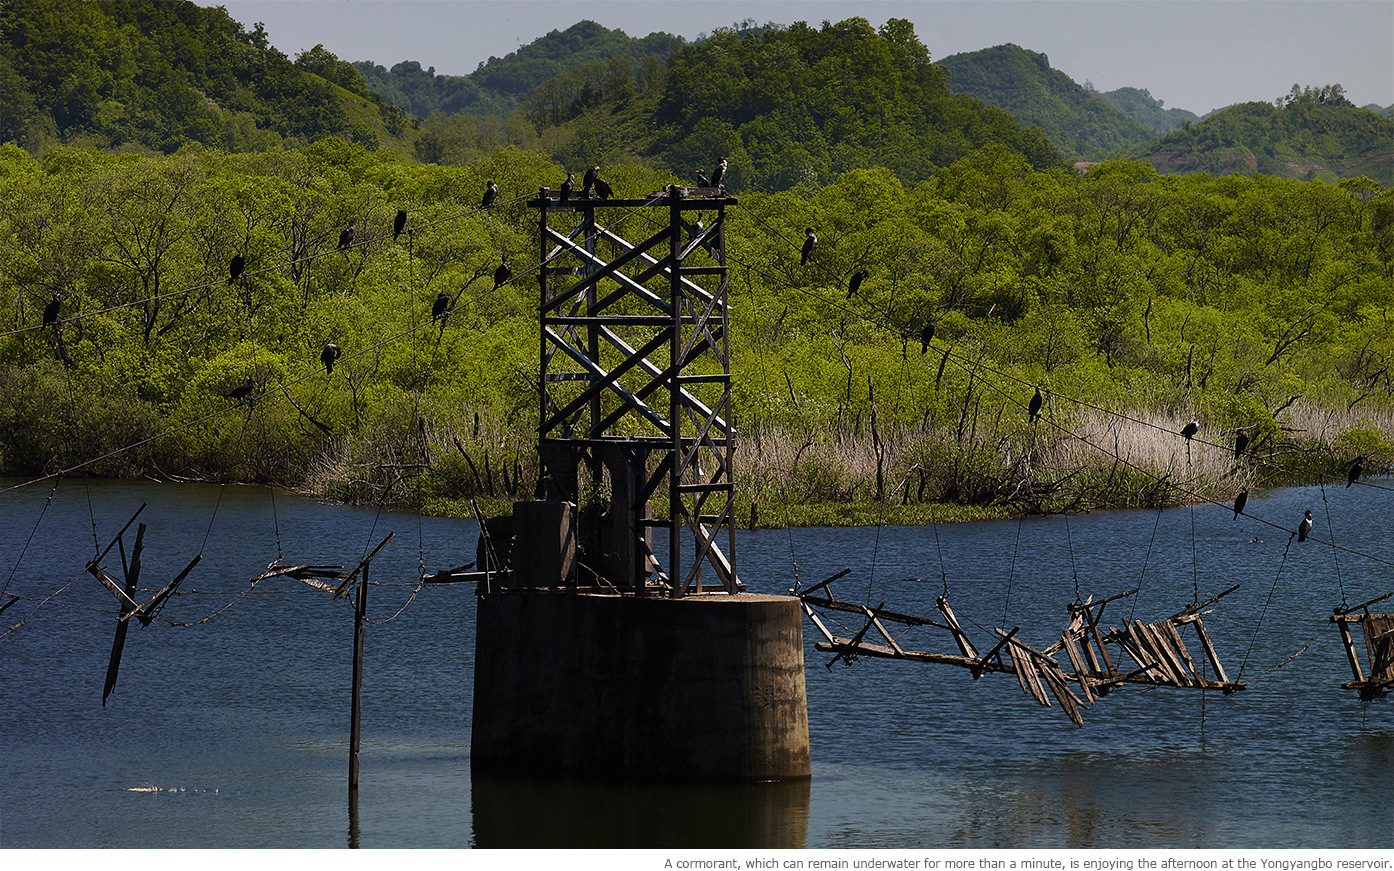 A cormorant, which can remain underwater for more than a minute, is enjoying the 3 afternoon at the Yongyangbo reservoir.